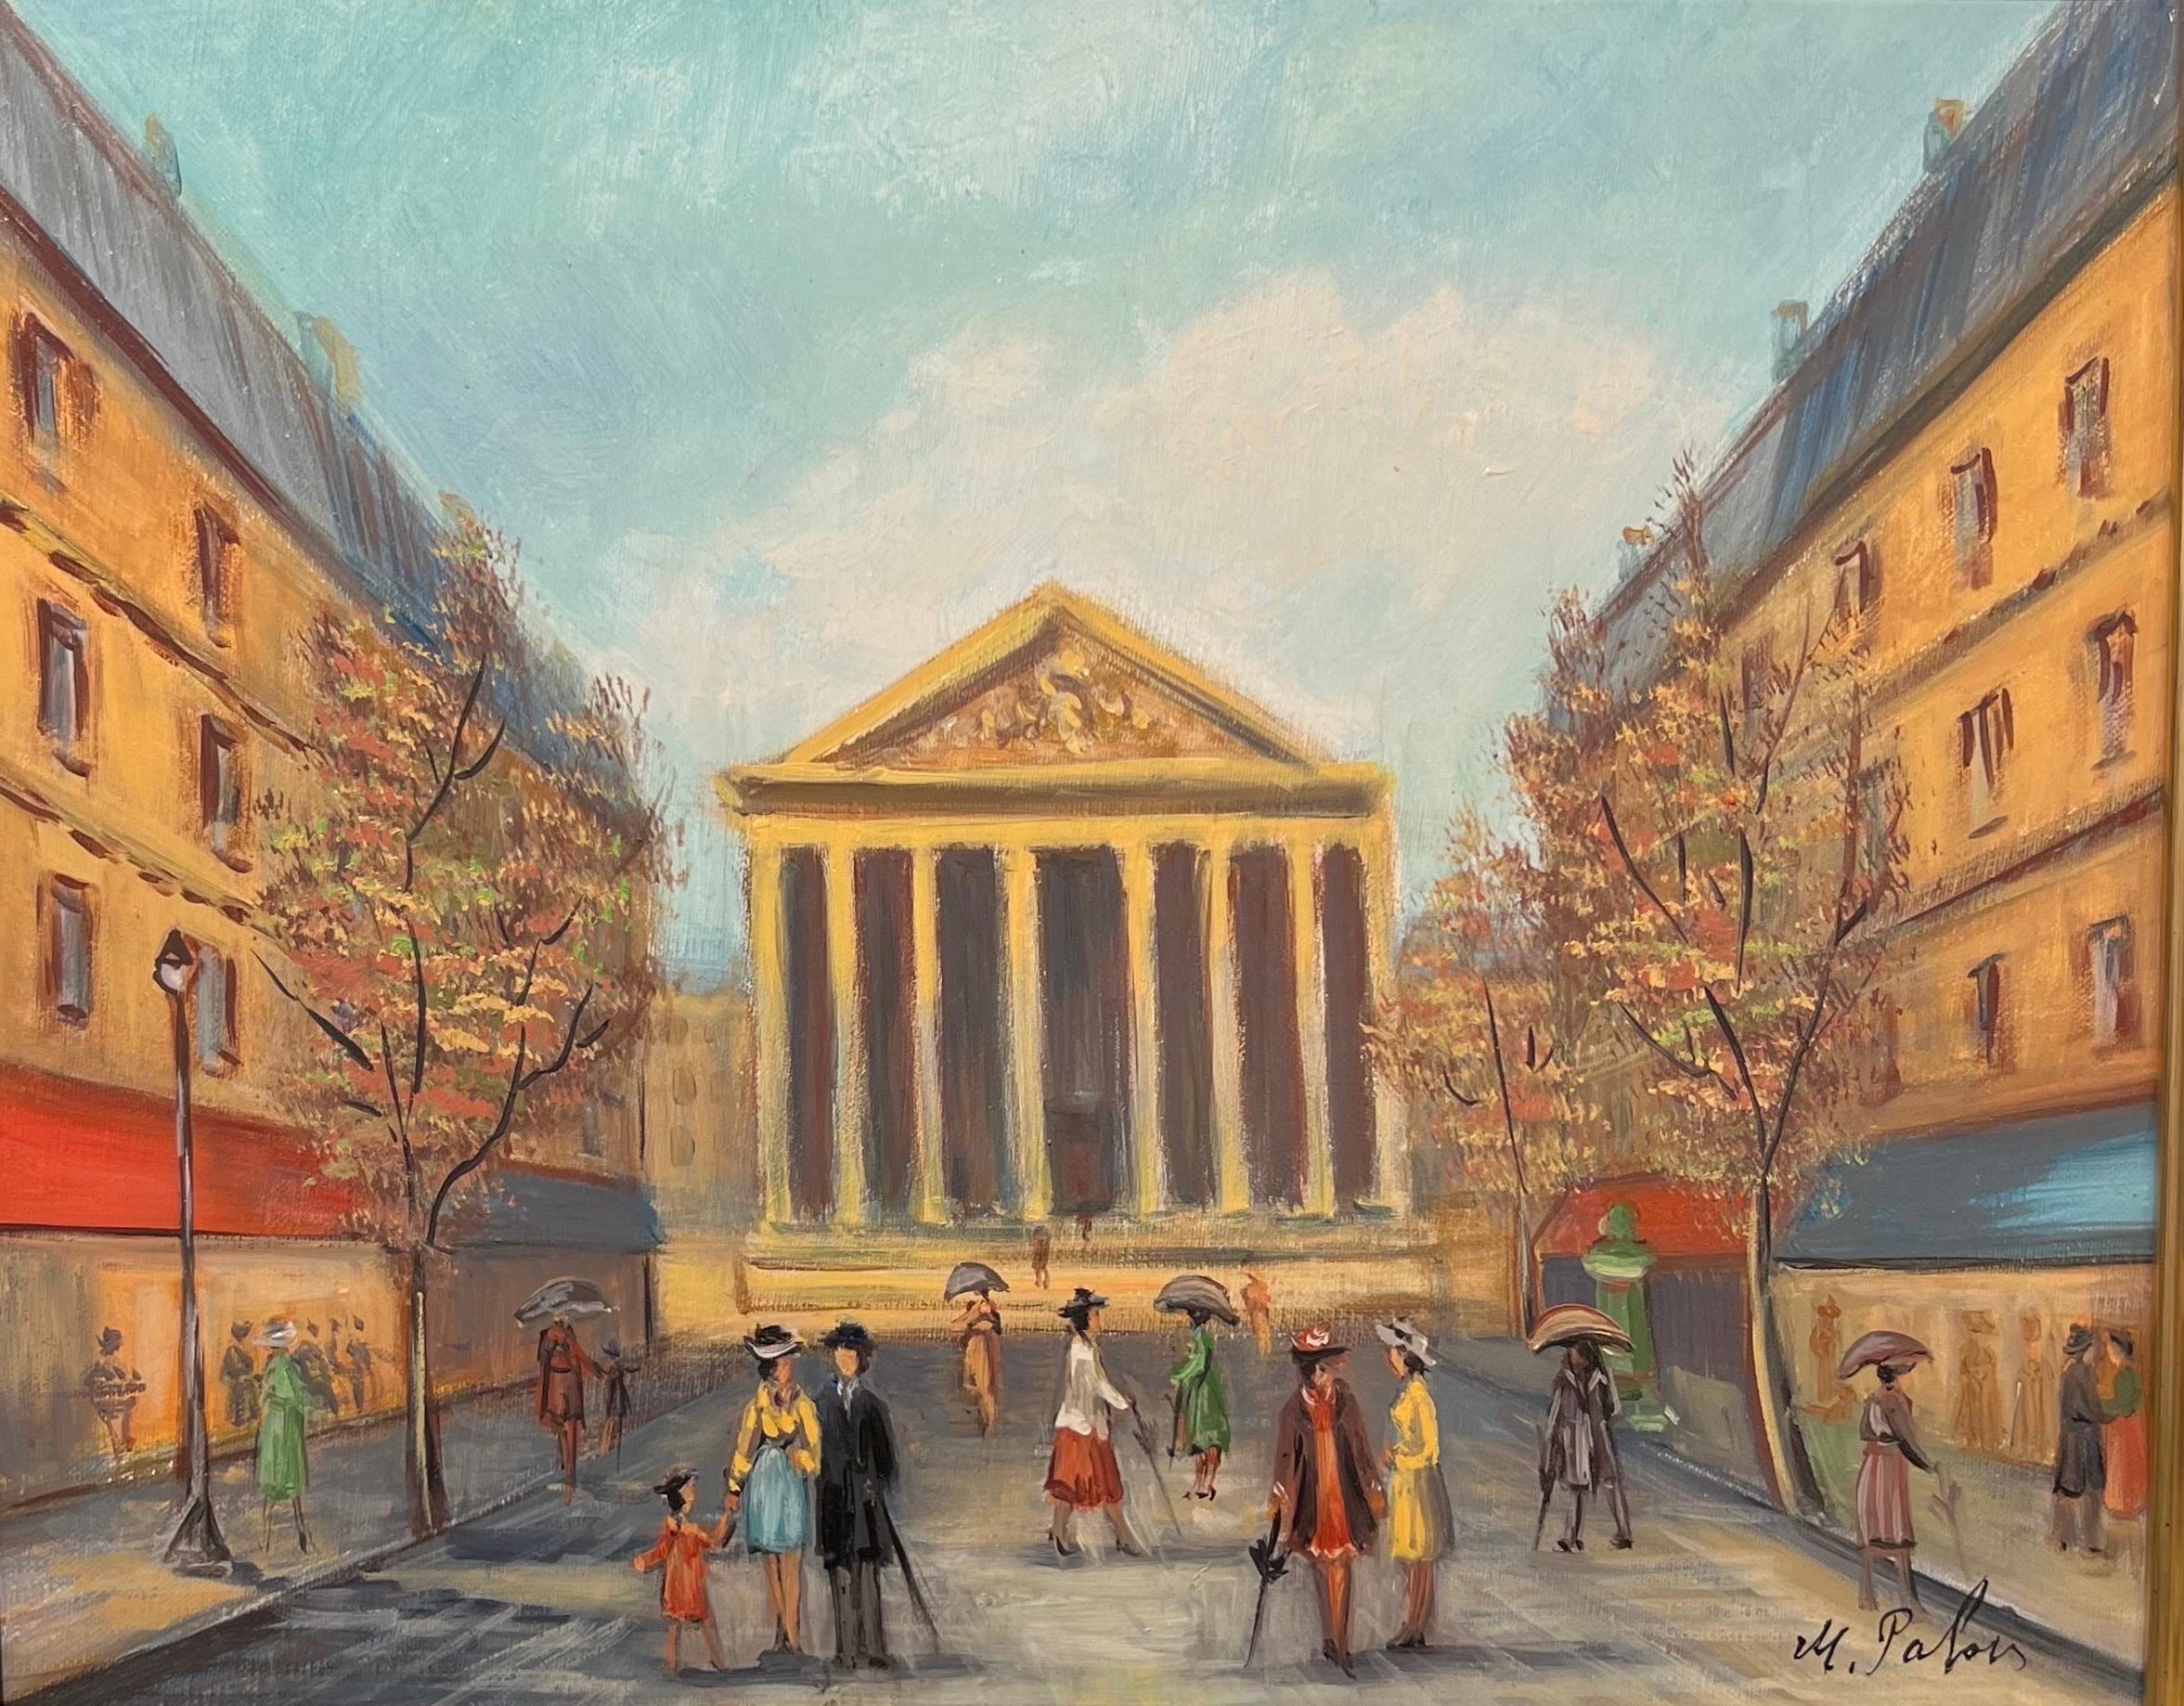 Boulevard de la Madeleine, Classic French street  - Painting by Miche Pabois